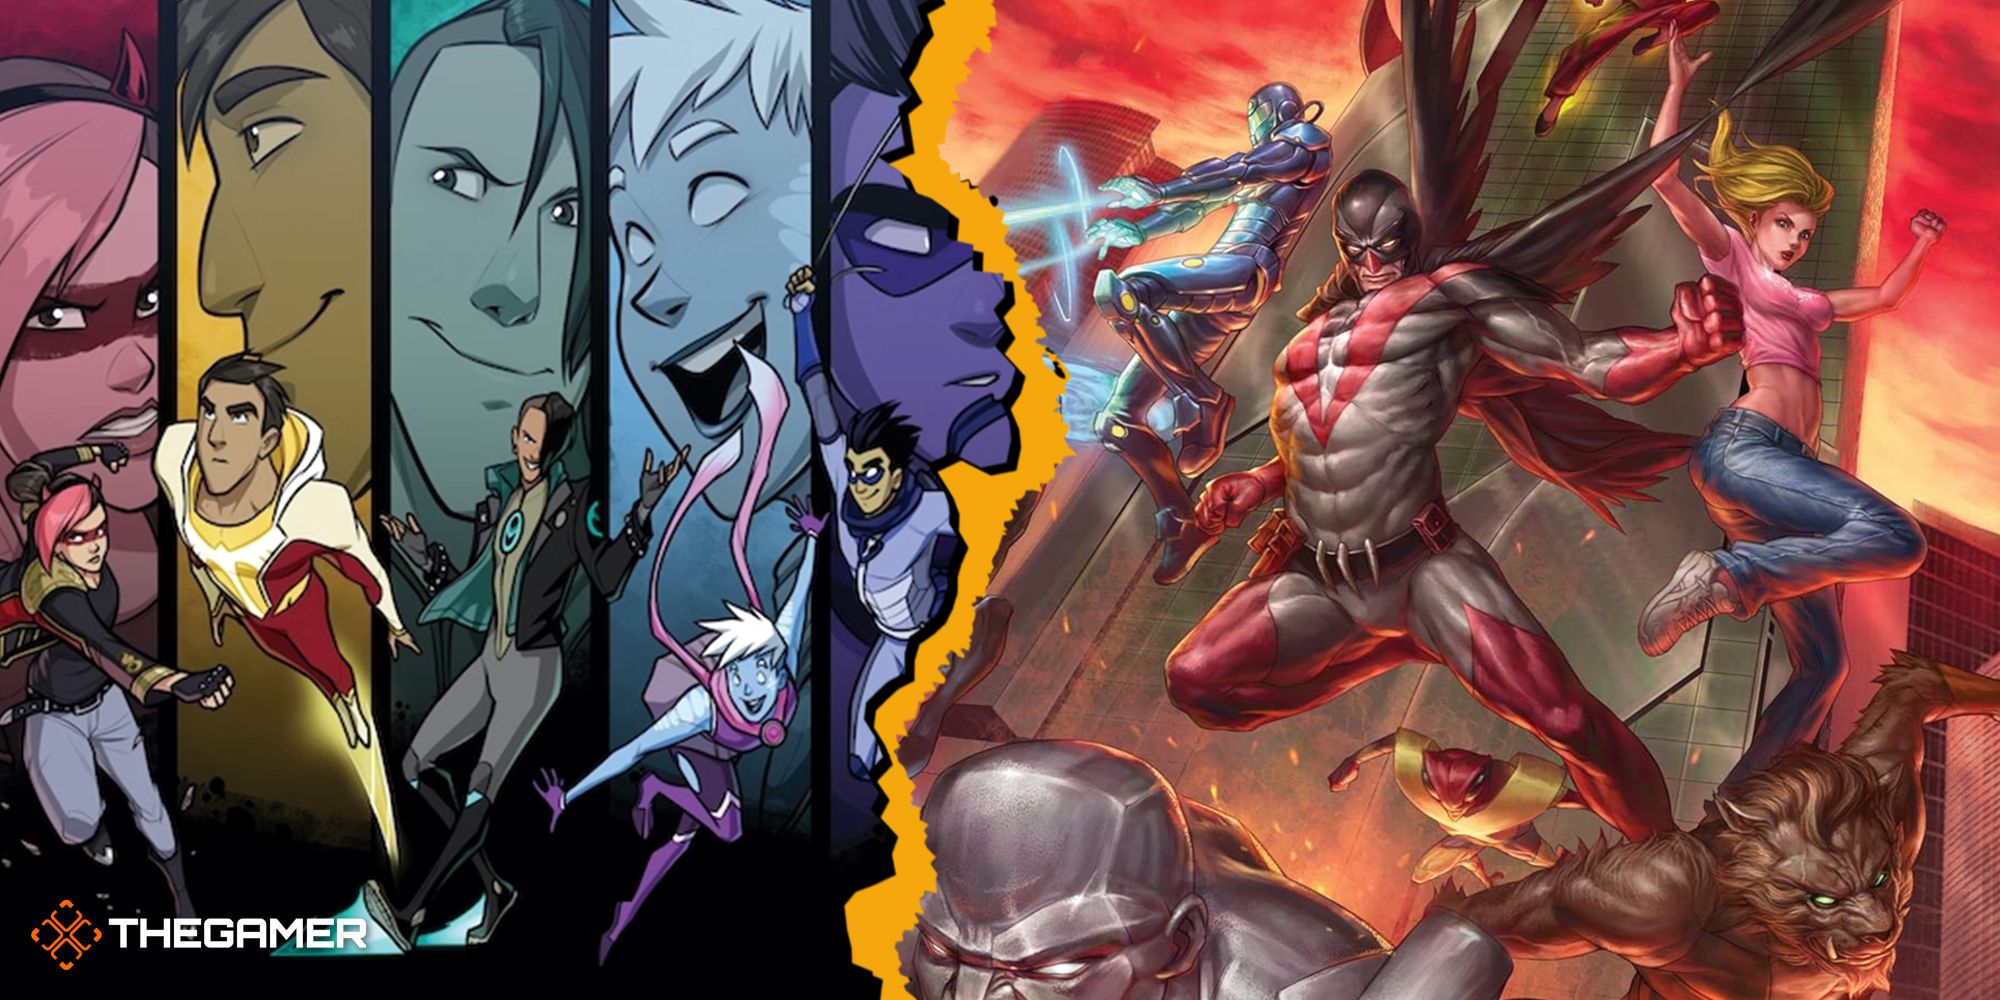 Art from Masks: A New Generation and Mutants & Masterminds.